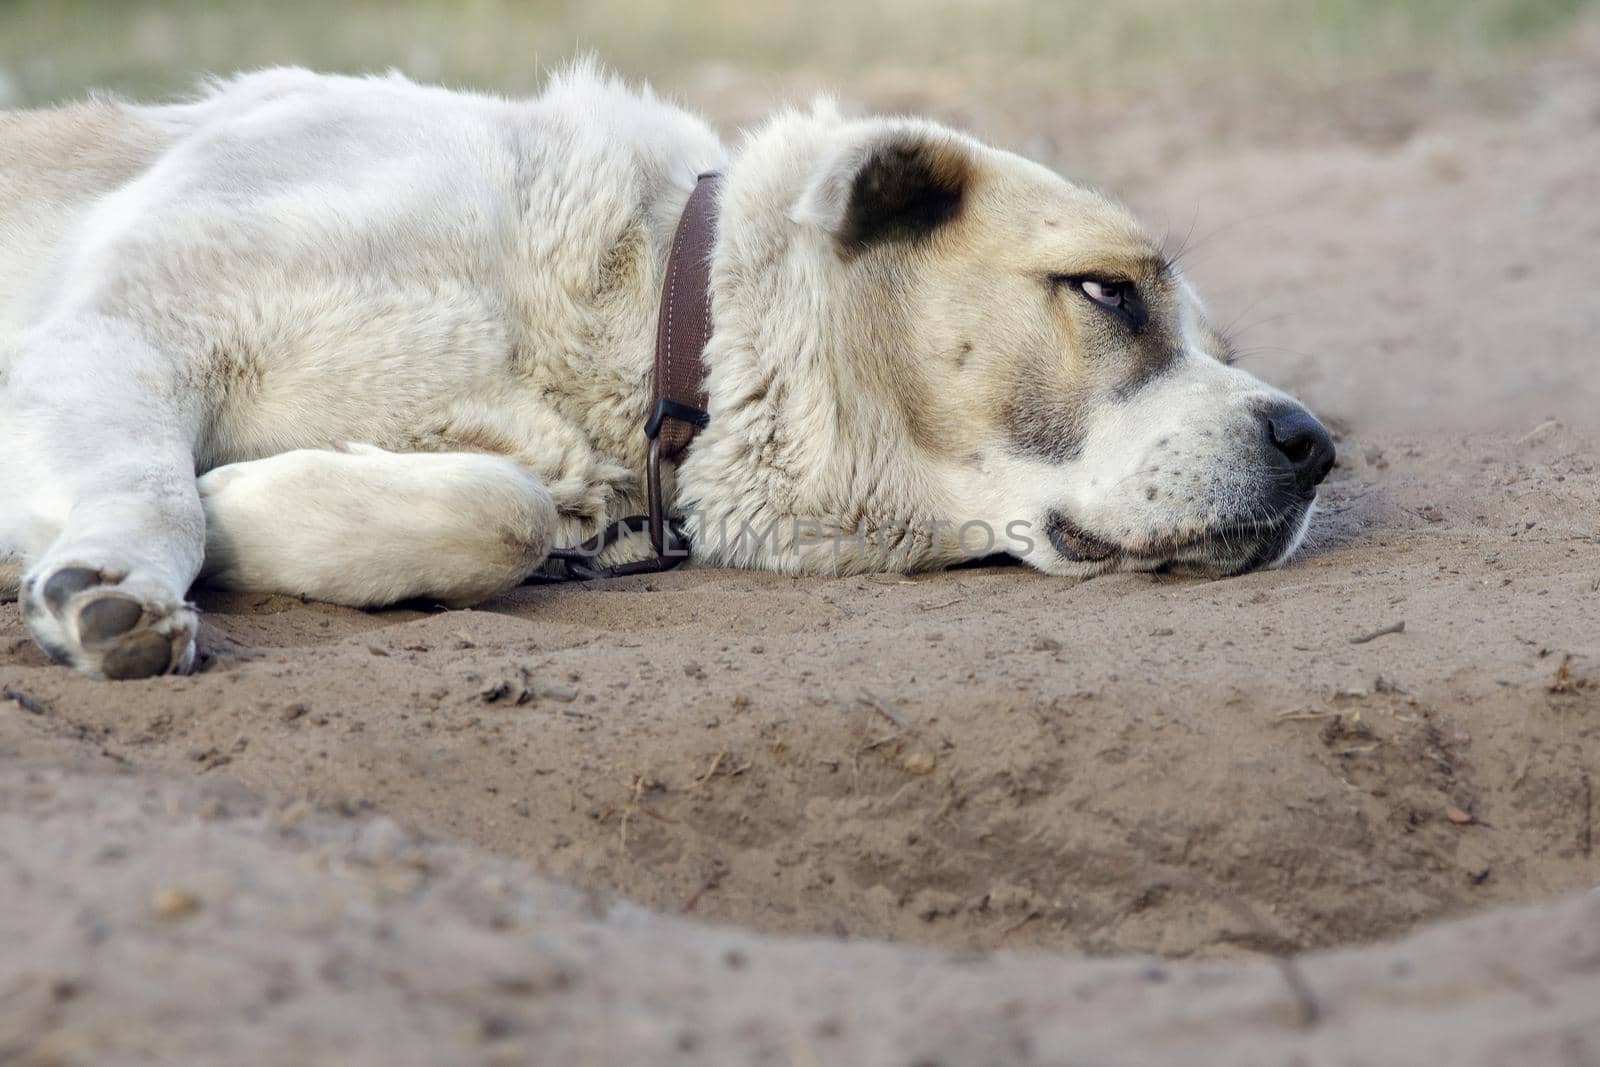 A lonesome, sad dog is sleeping and tied to a chain next to rural yard by Lincikas